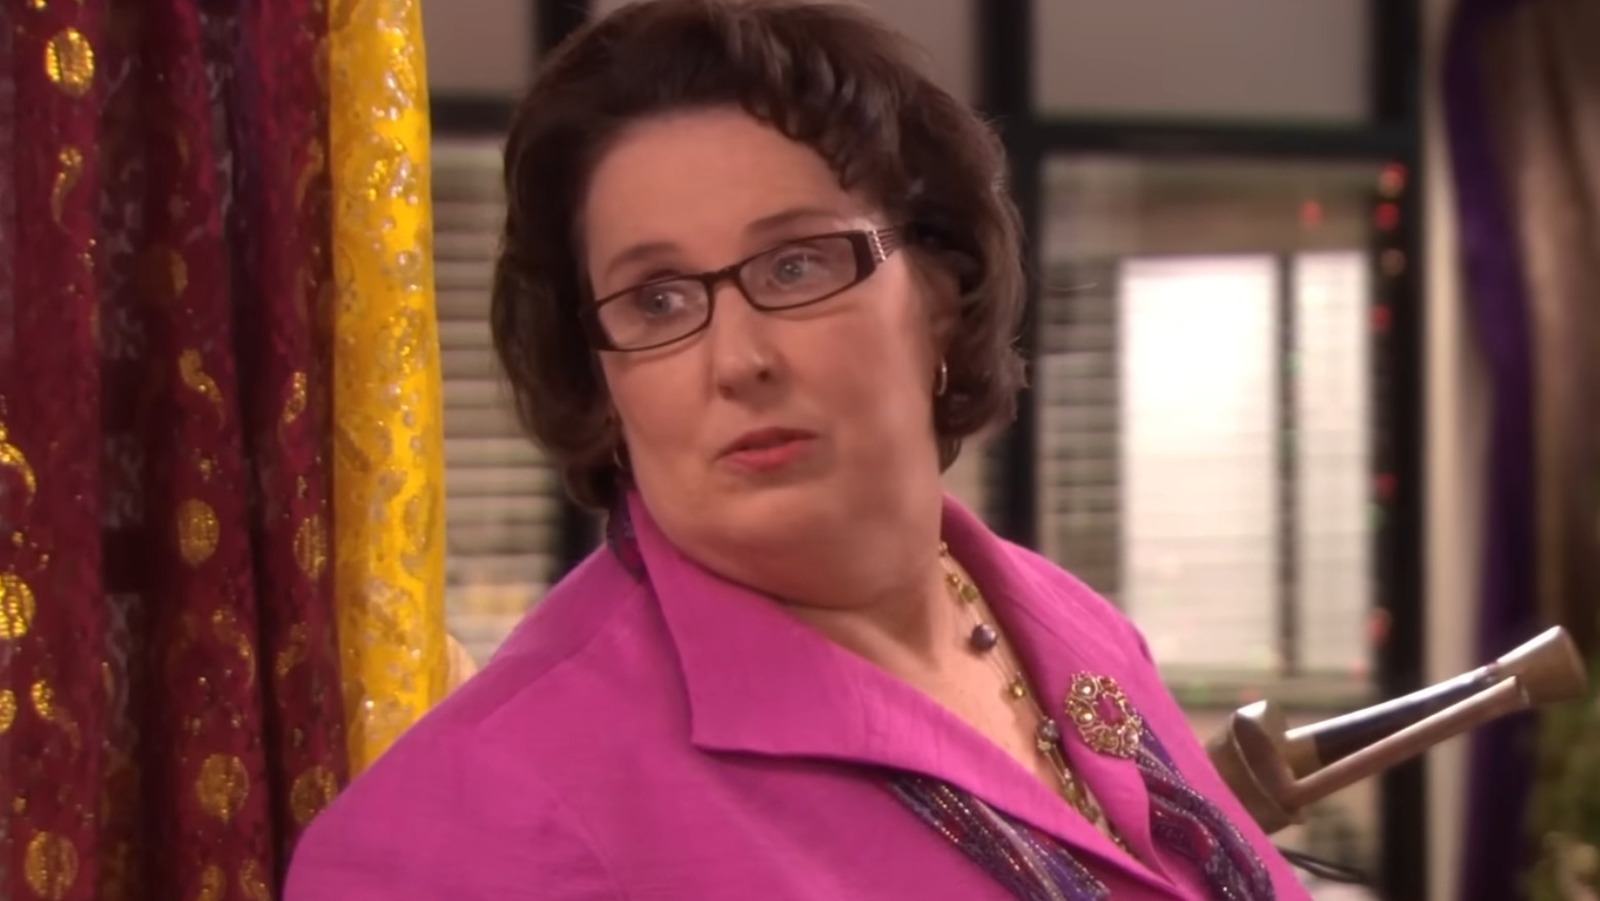 The Office's Phyllis Smith Never Intended On Auditioning For The Show